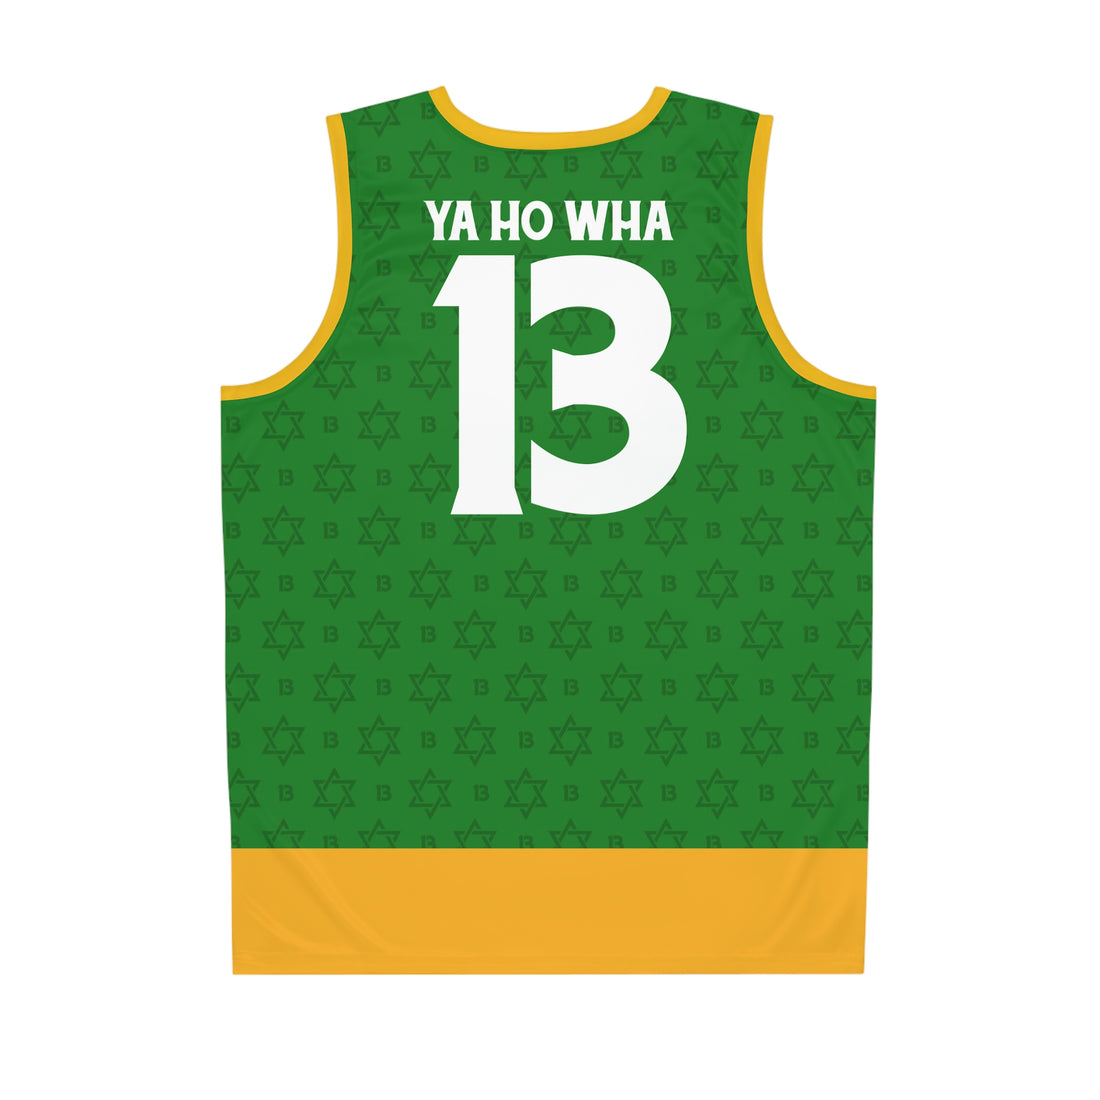 Father Yod's Team Green Jersey